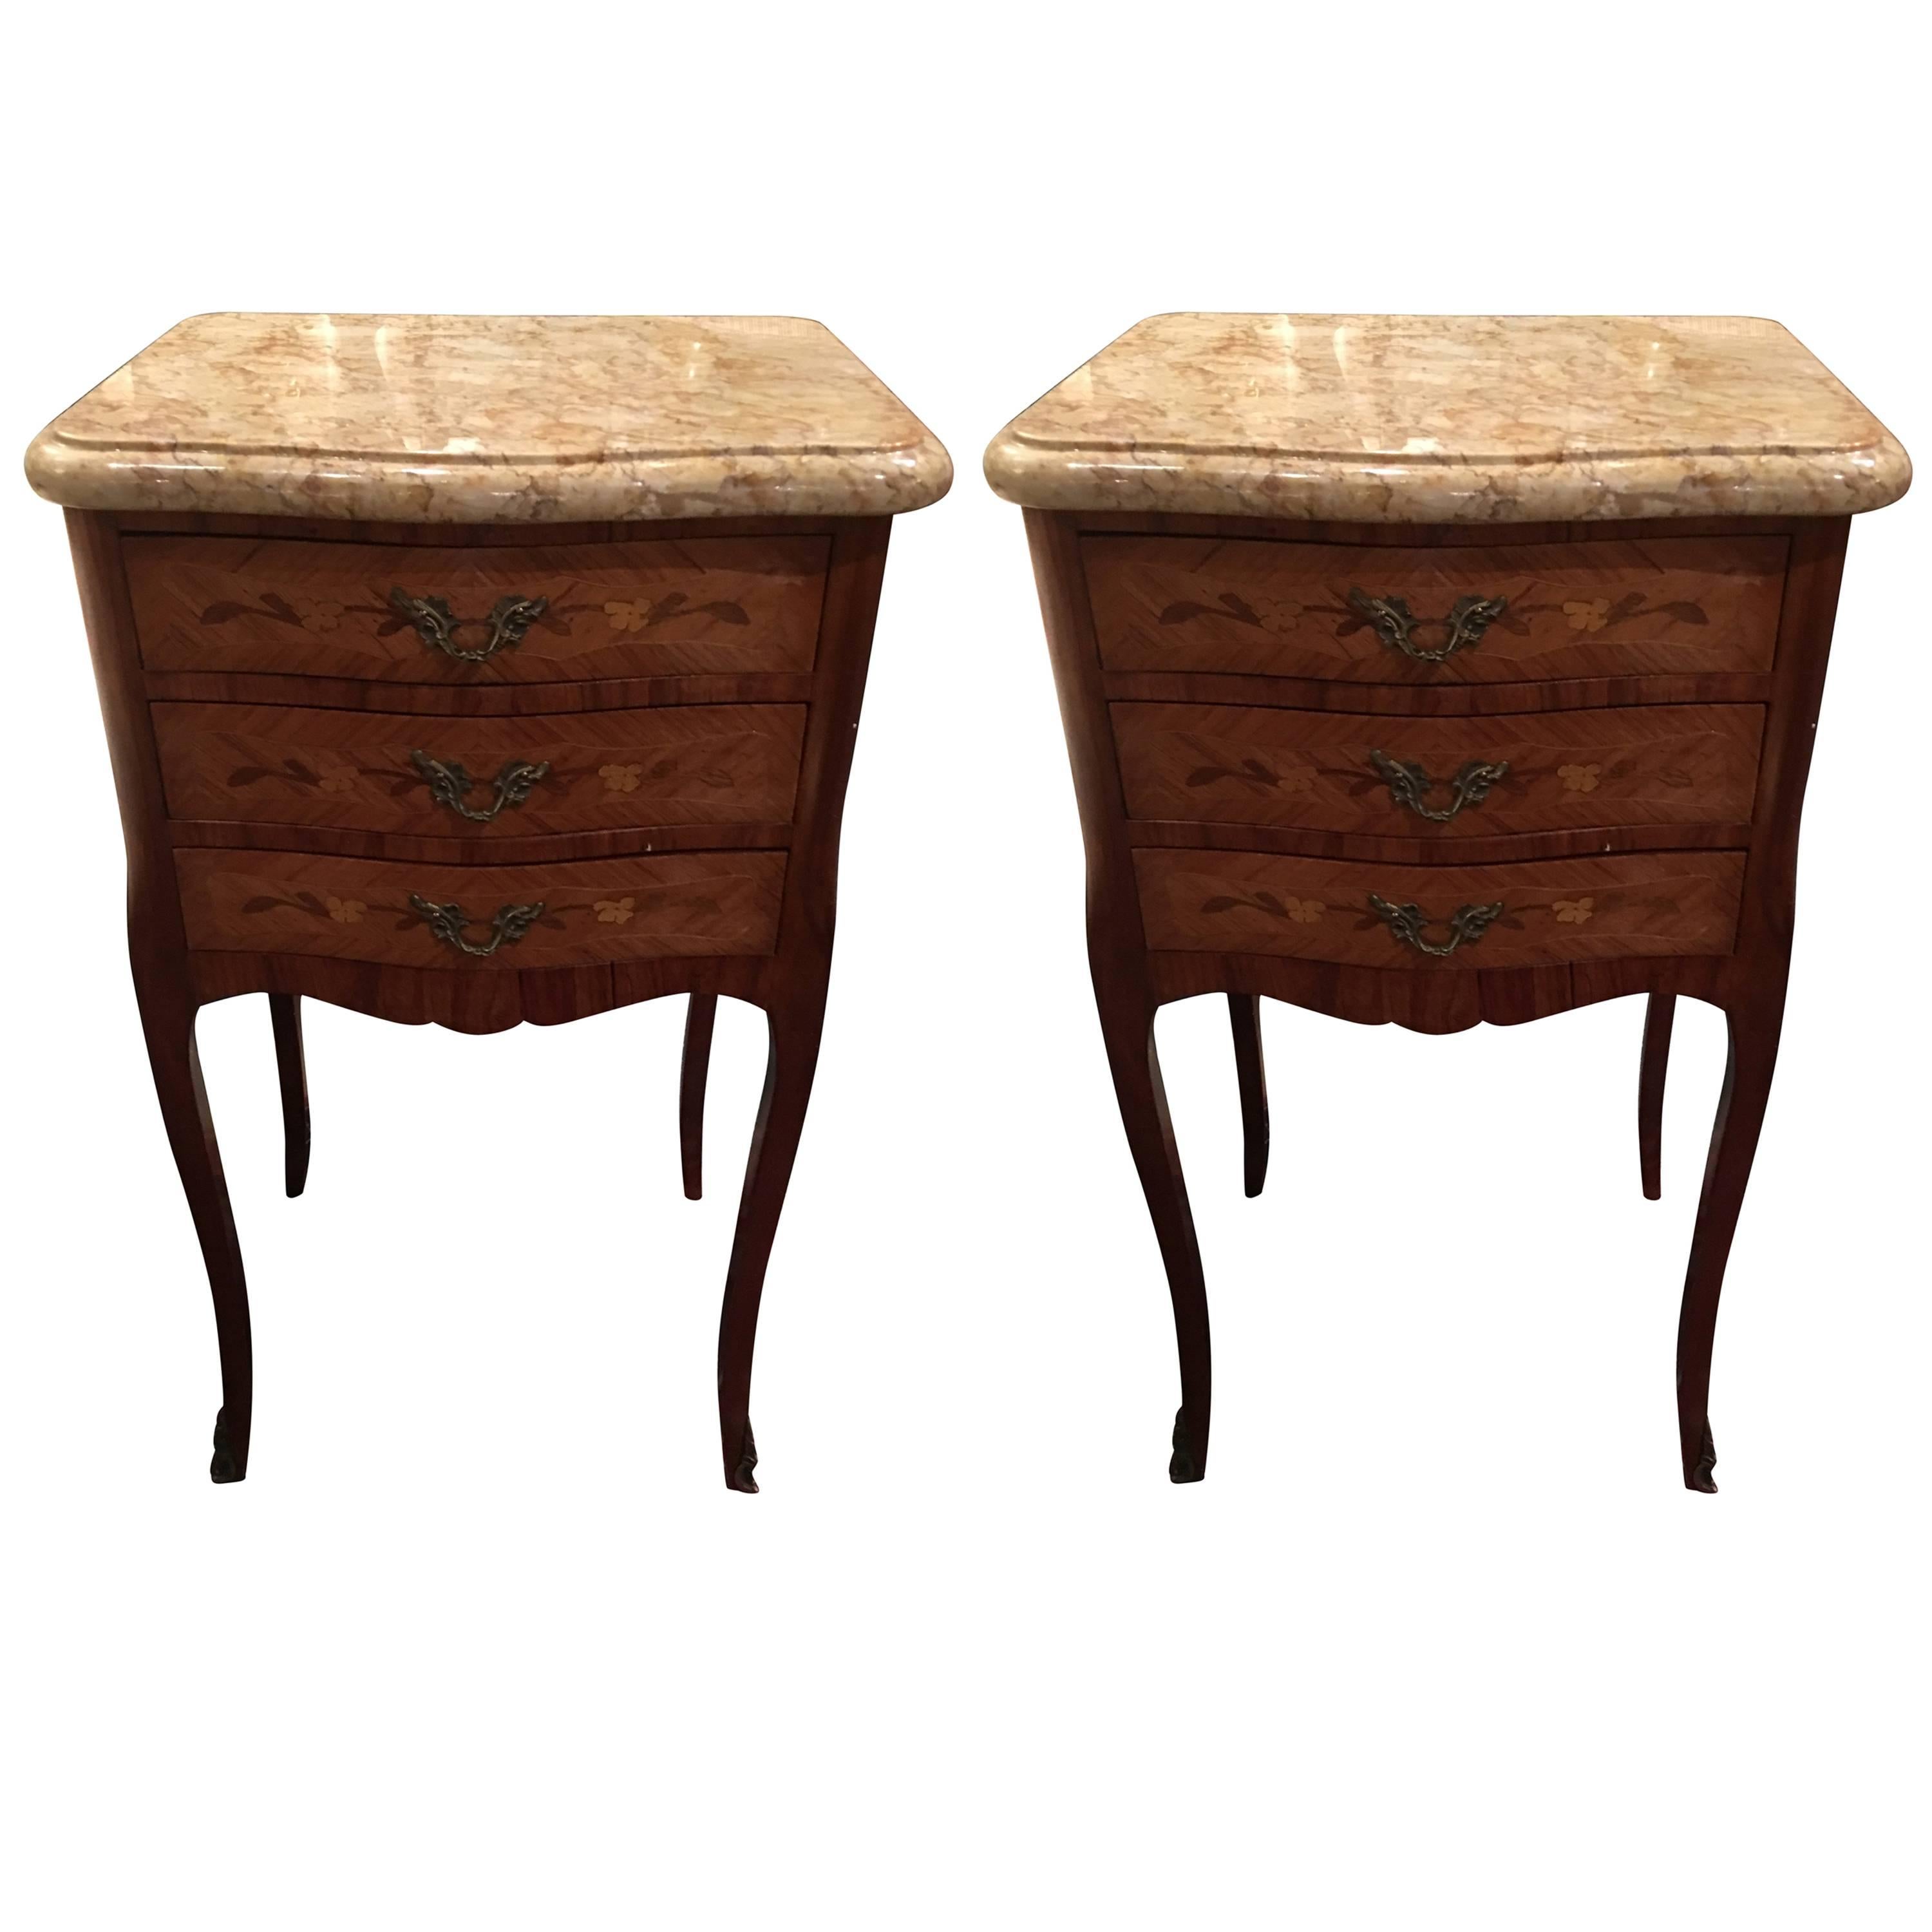 Pair of French Side Tables or Nightstands with Marble Tops, 19th Century